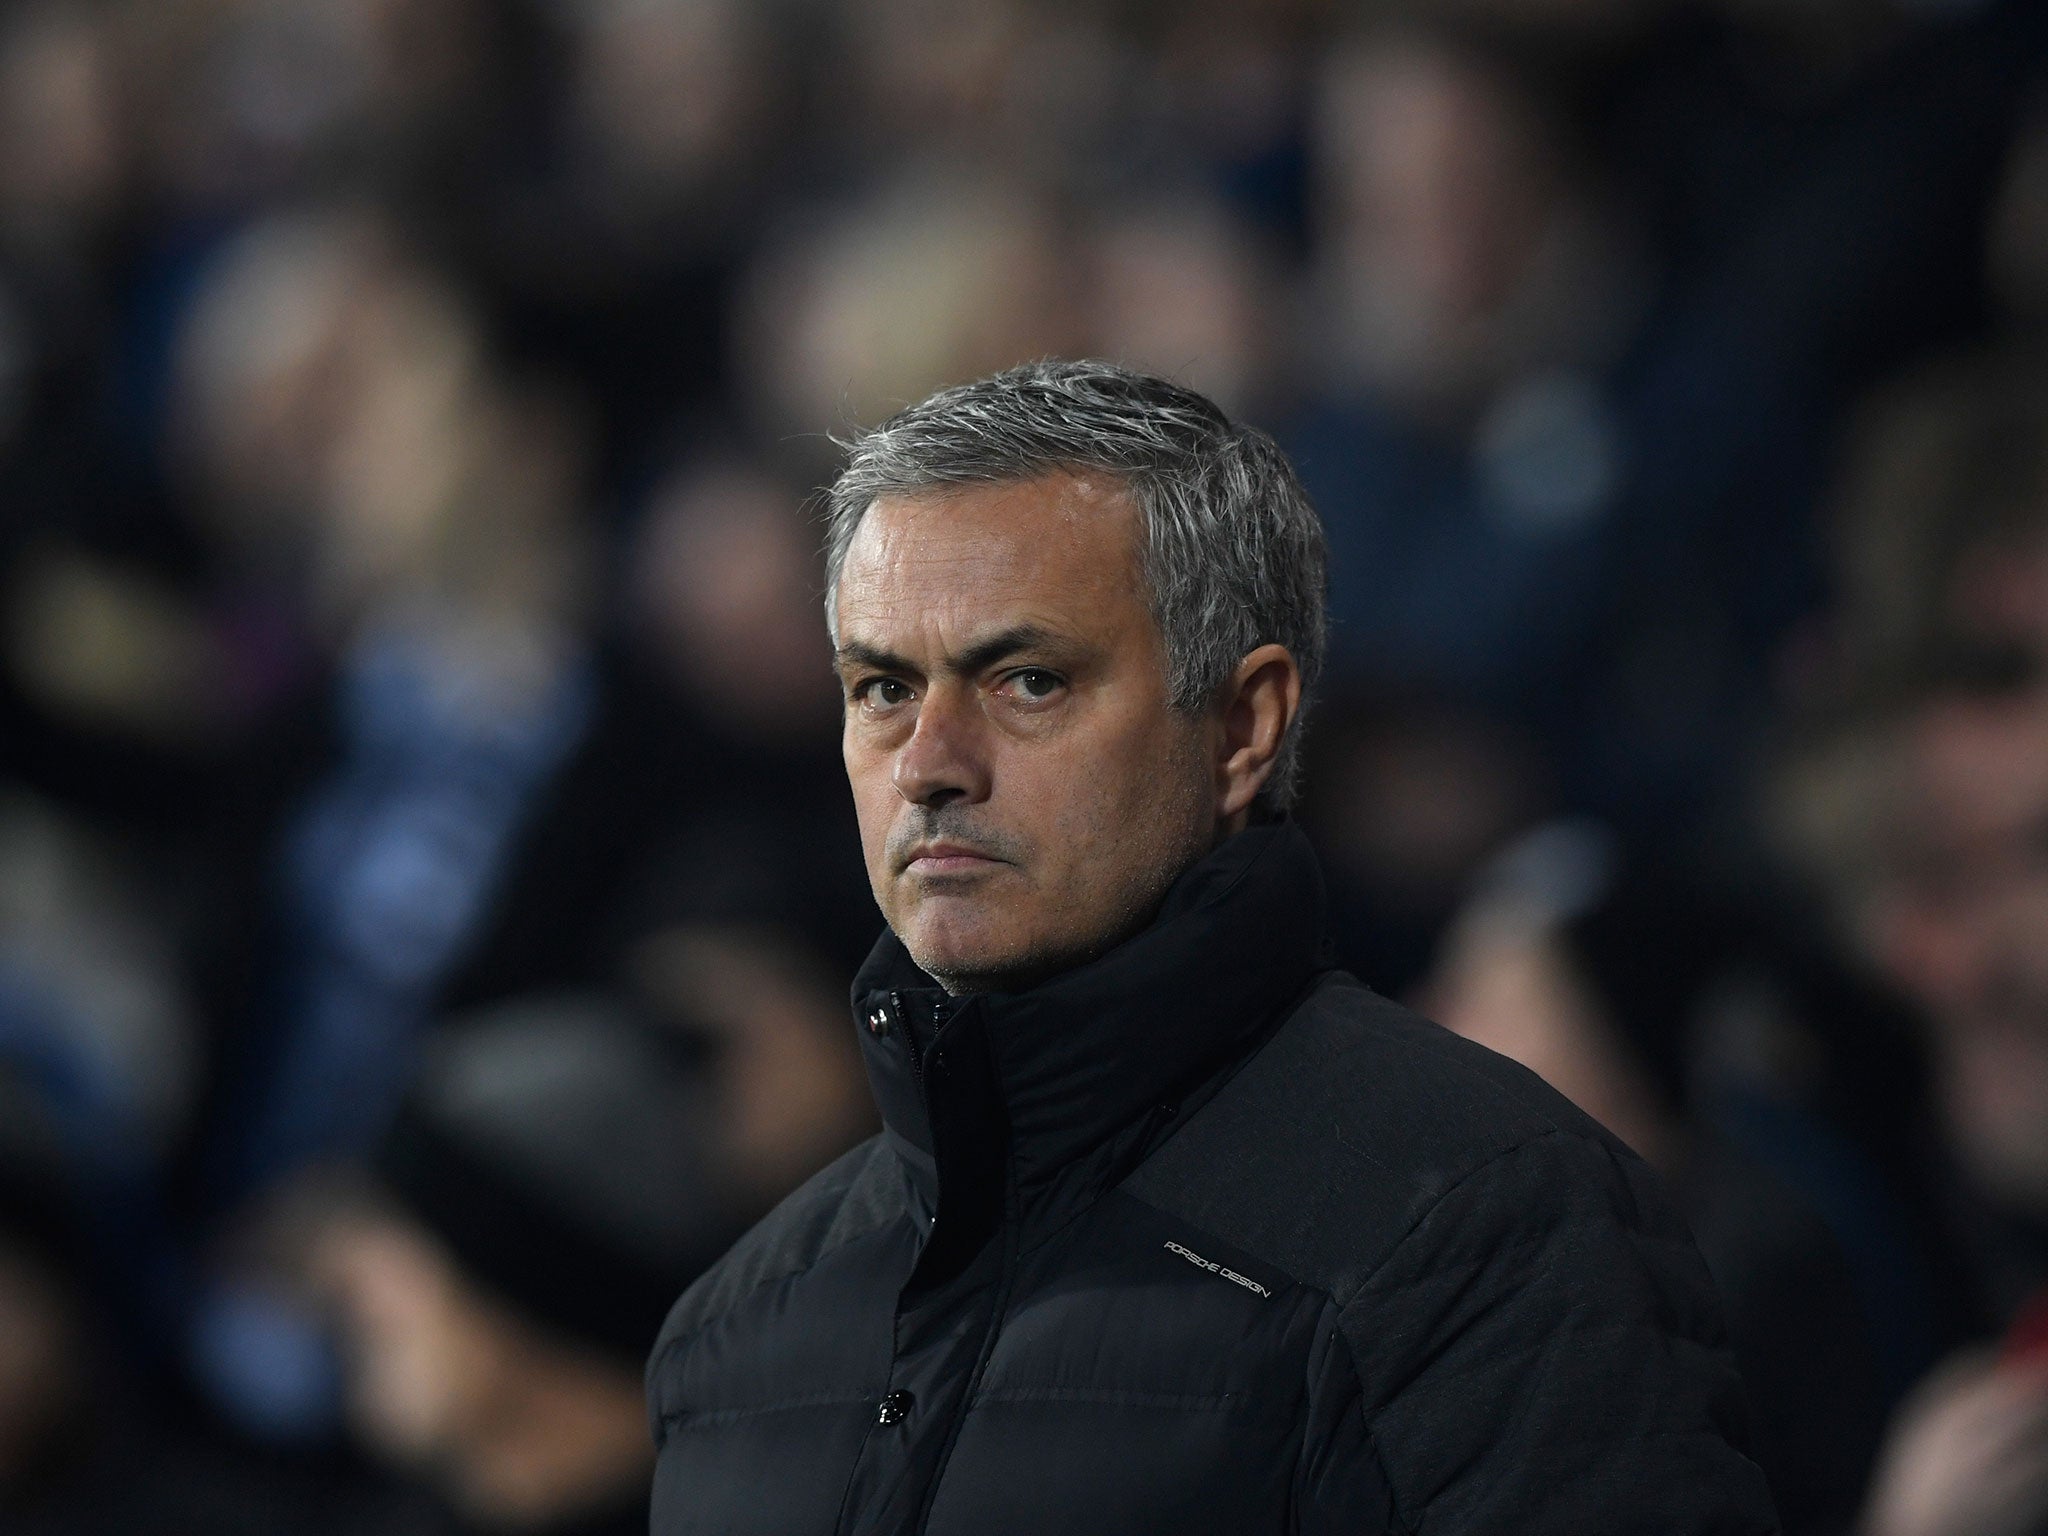 Mourinho admitted he wished he had given more of United's fringe players a 'real chance' to prove themselves